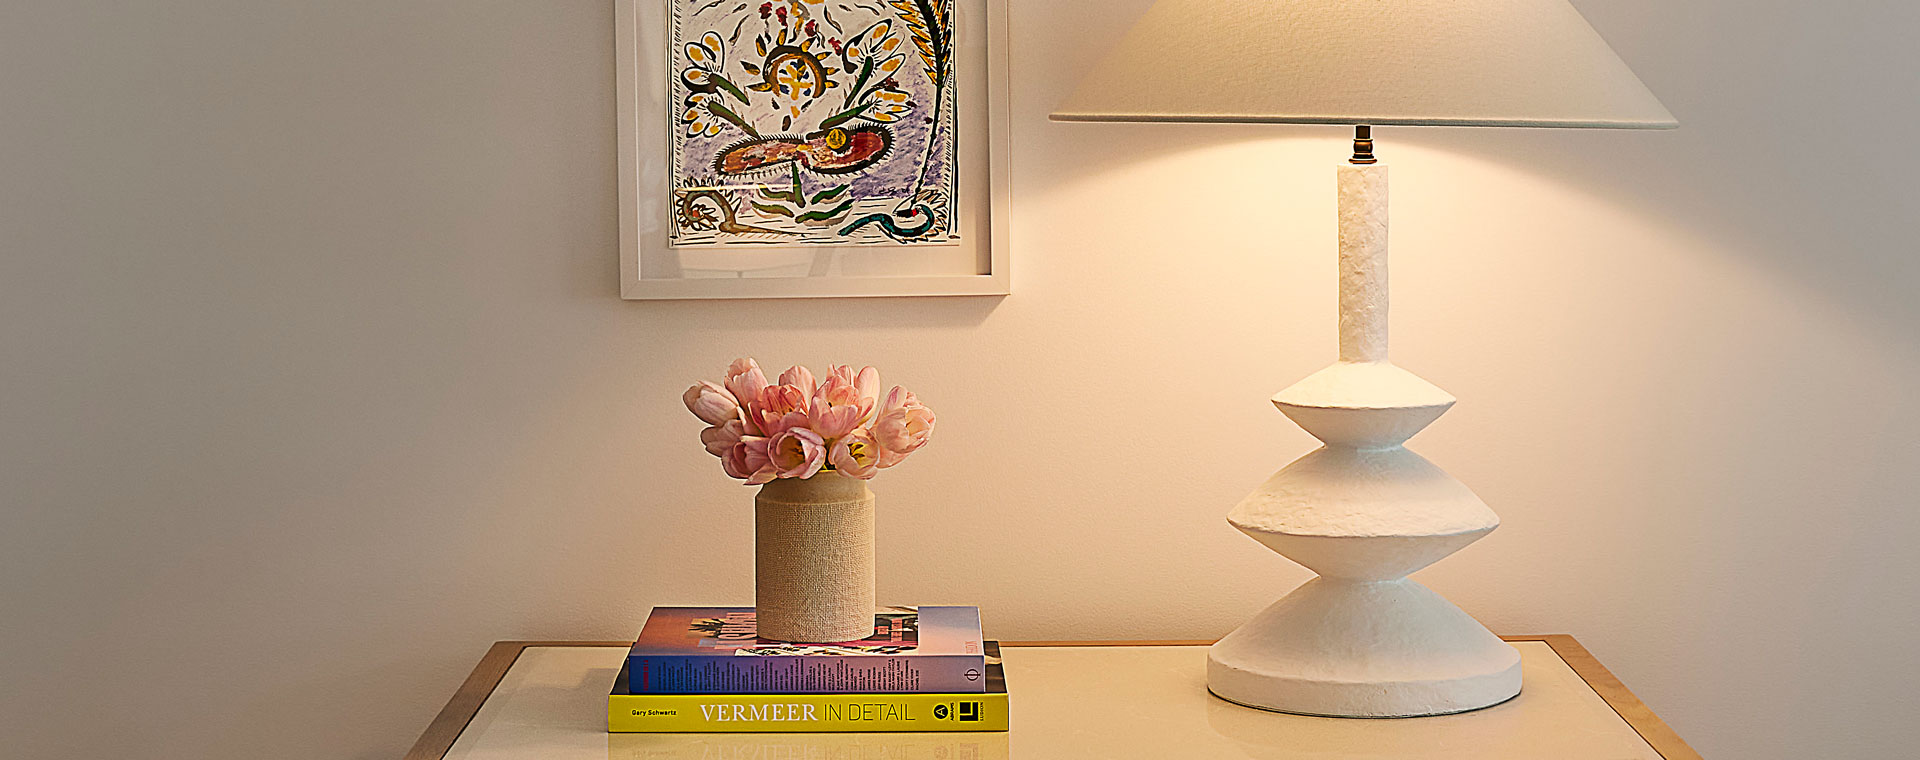 Artisanal lamp, notebooks, tiny flower pot, and overhead portrait; artfully curated tabletop vignette.